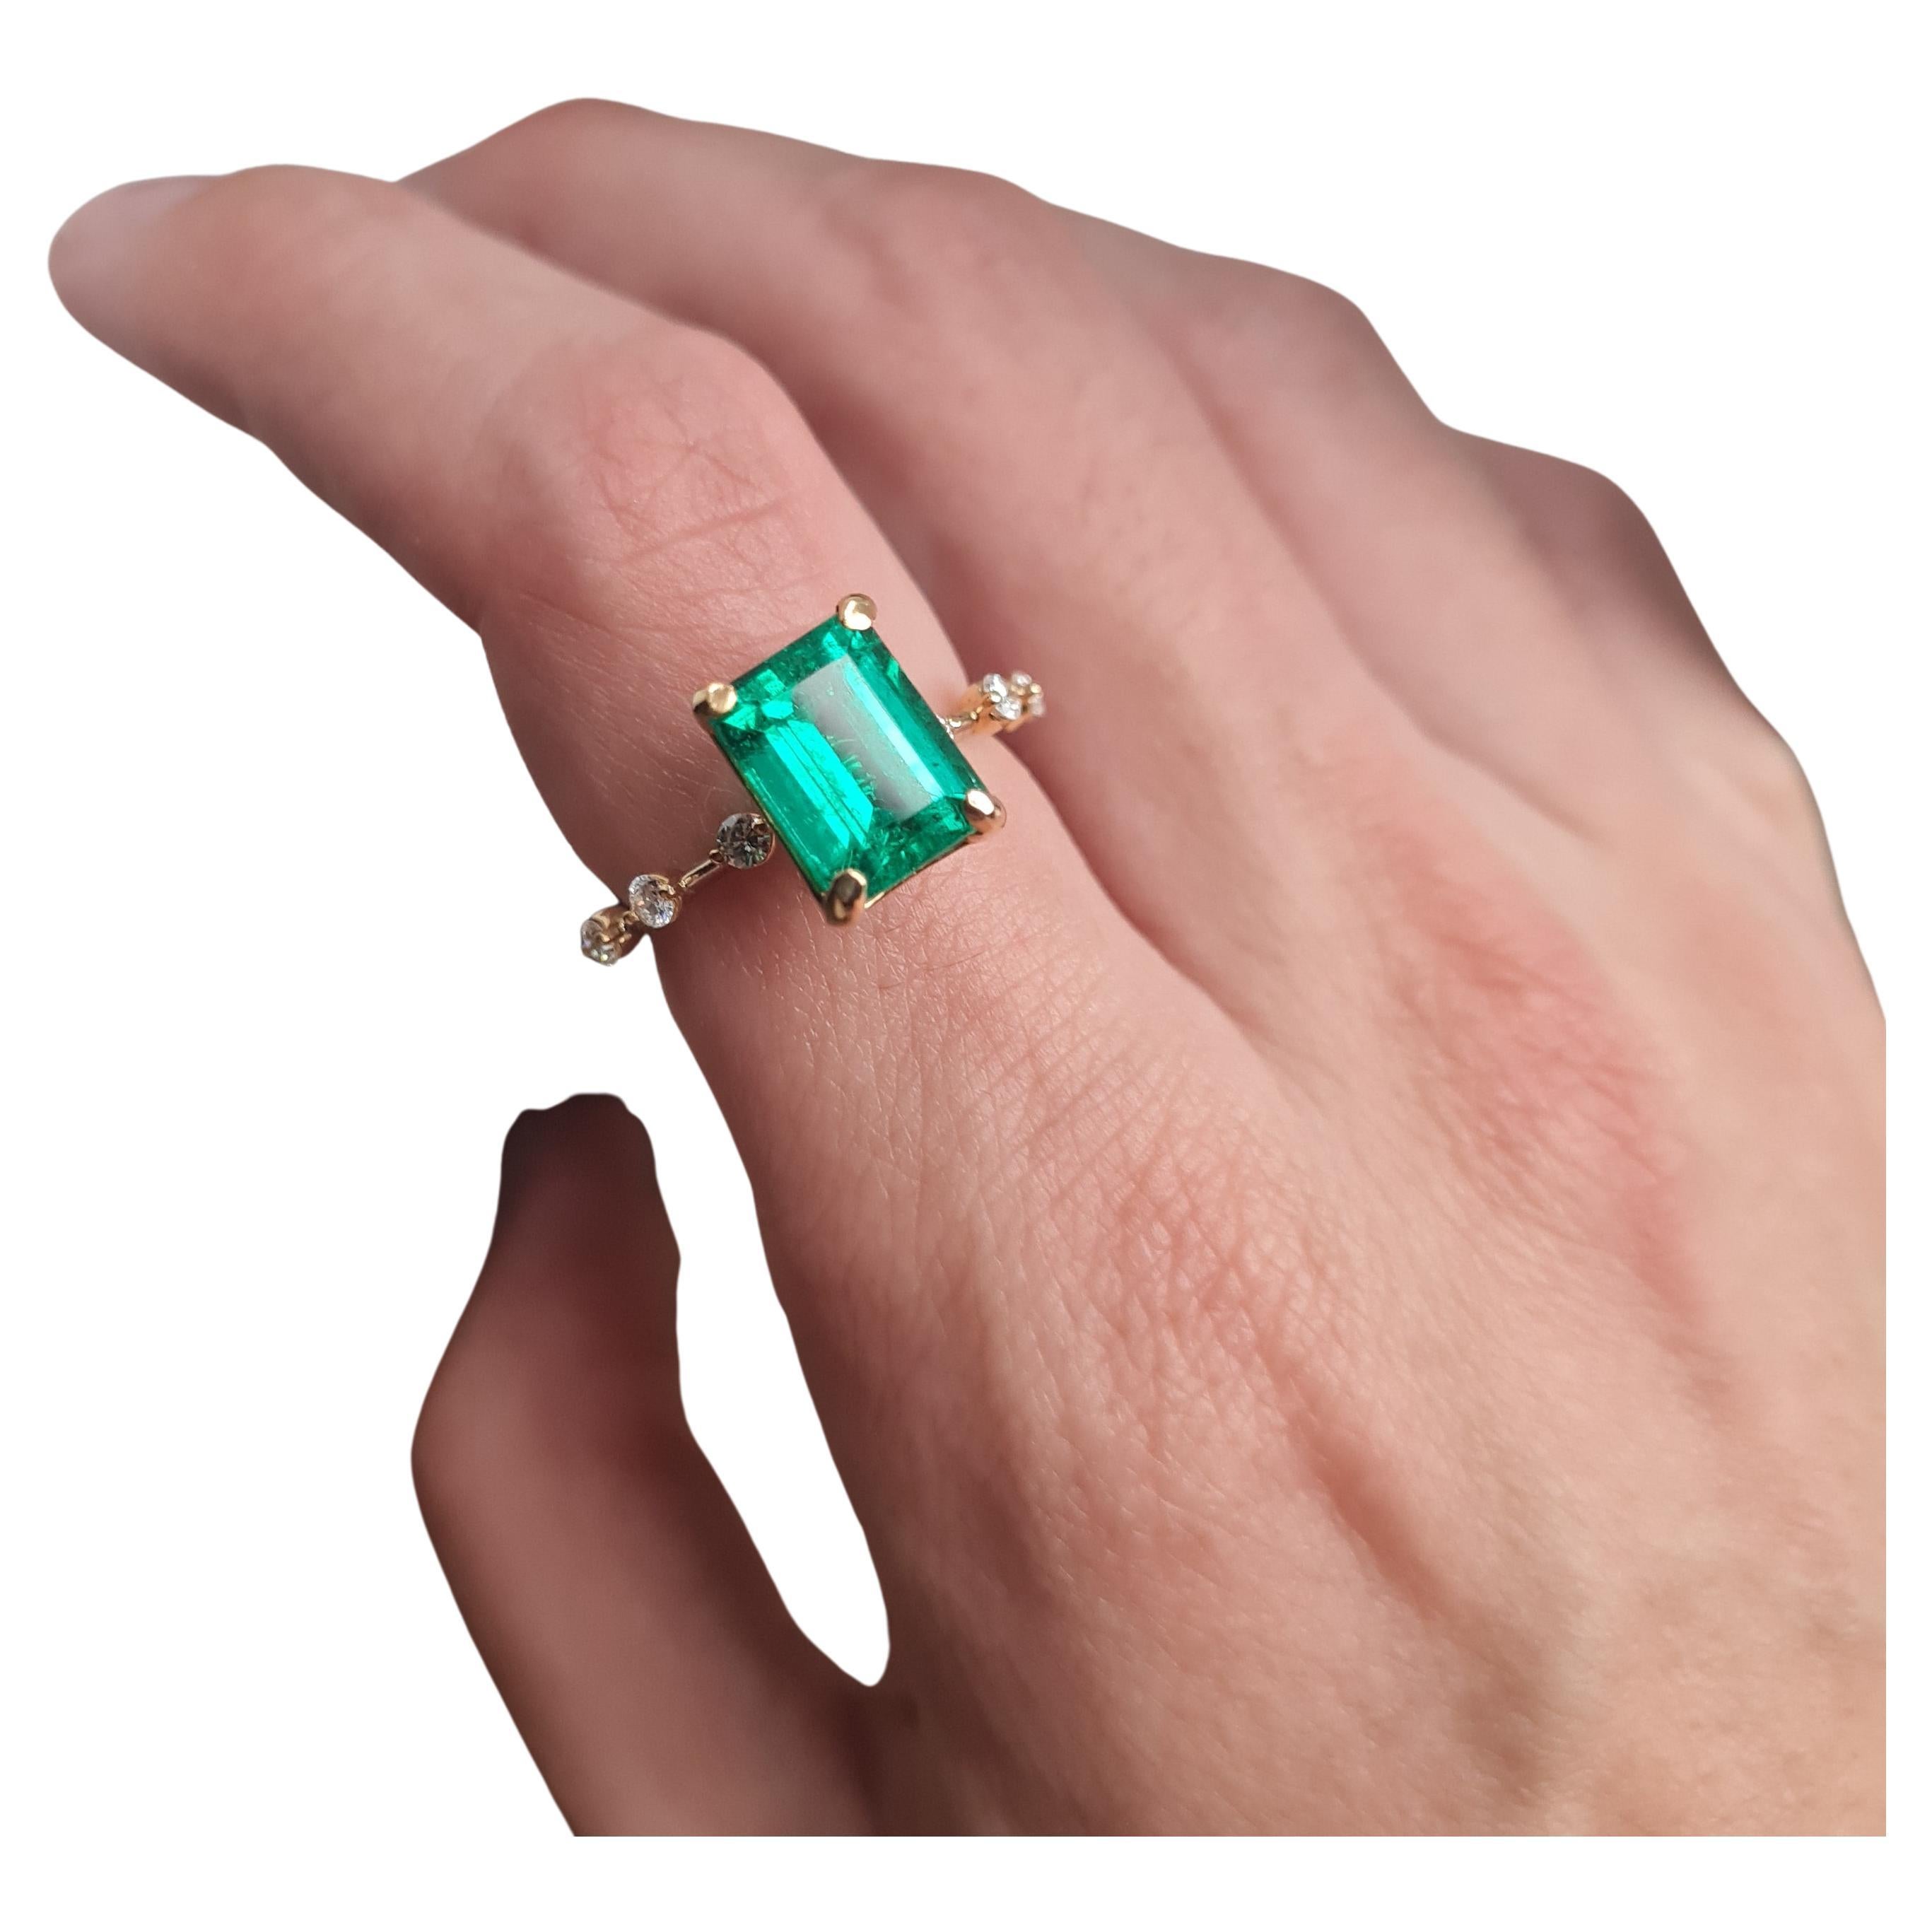 This is the first Columbian Emerald-Cut, Emerald made by Jacob Ravdin. This stone is unlike any other, a true rarity. This stone comes with a GIA certificate, which not only states its authenticity, but origin, too. This ring is crafted out of solid